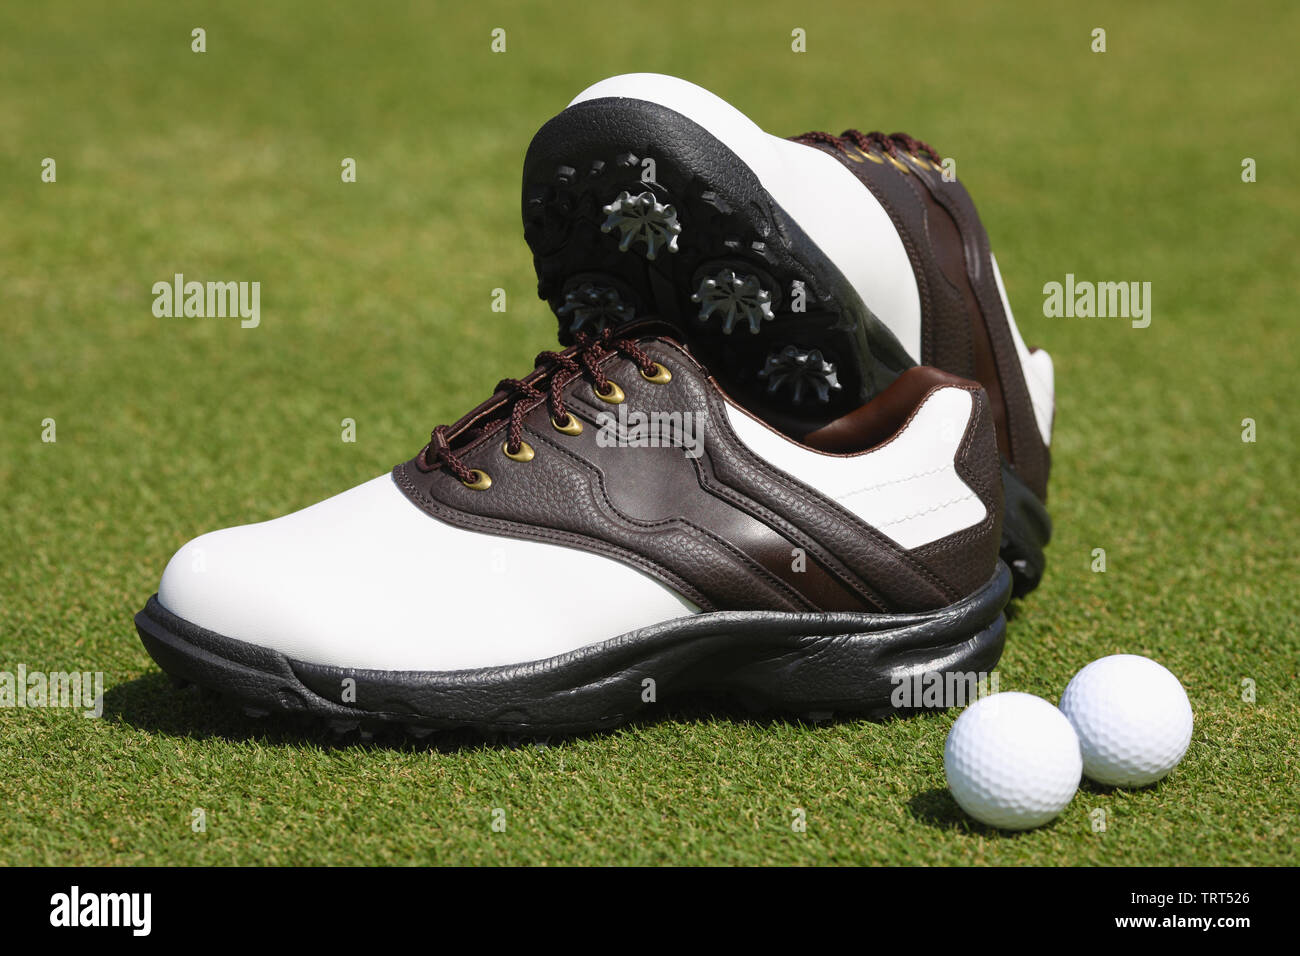 Pair of golf shoes and two golf balls on grass Stock Photo